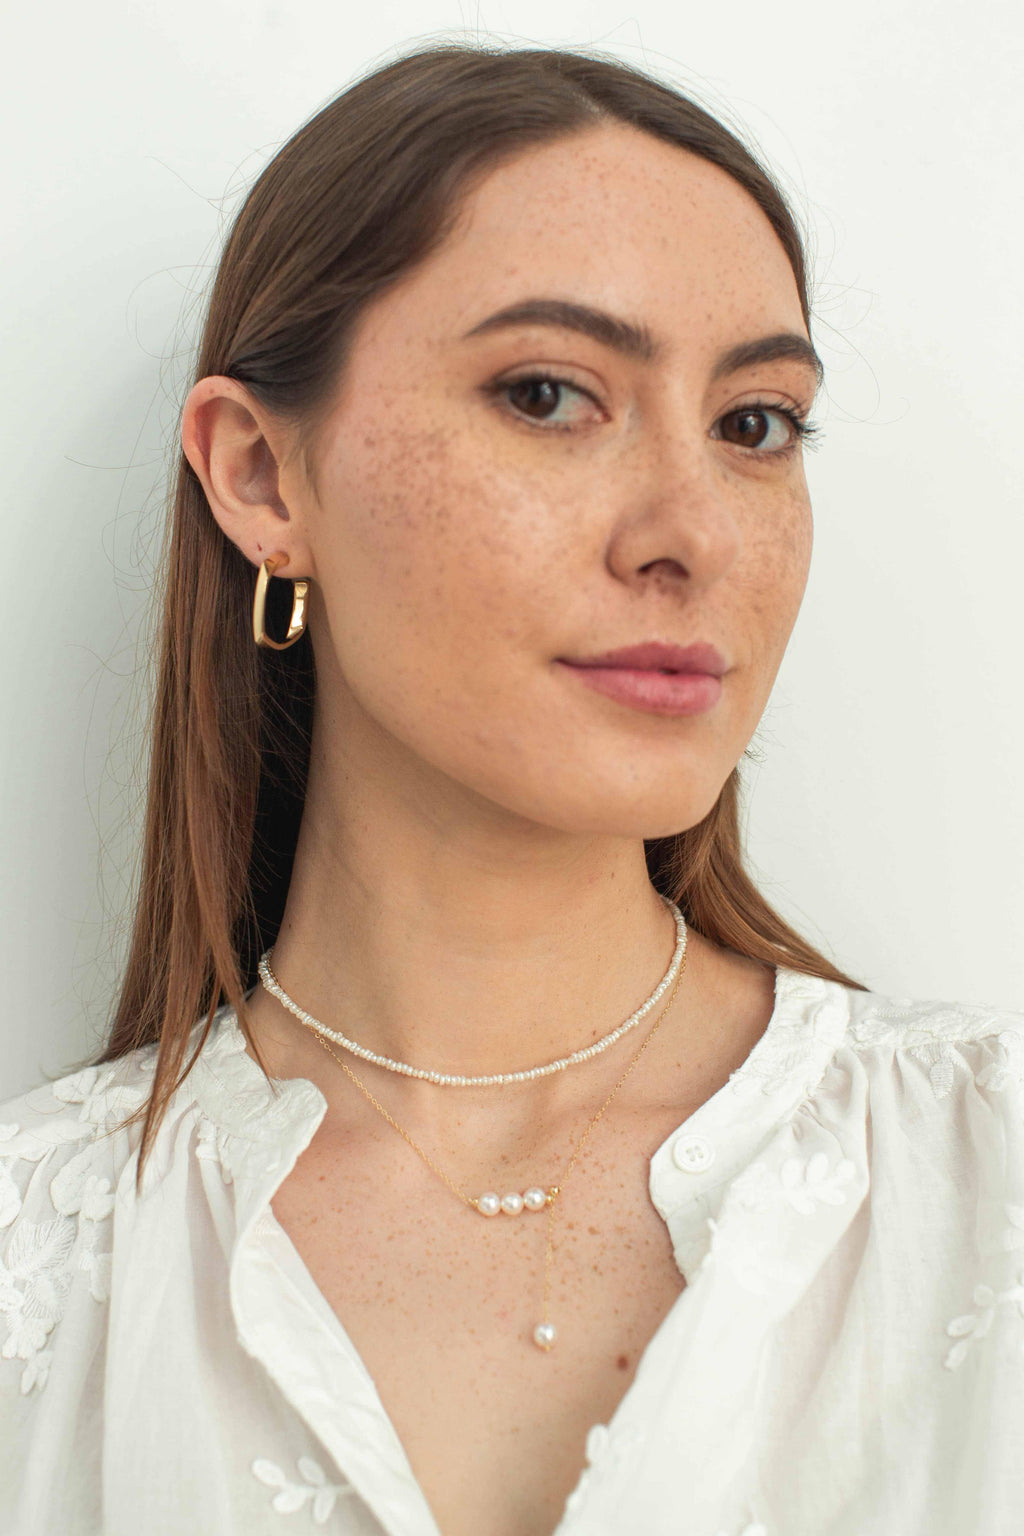 Monet Jewelry Simulated Pearl Drop Earrings | Hamilton Place